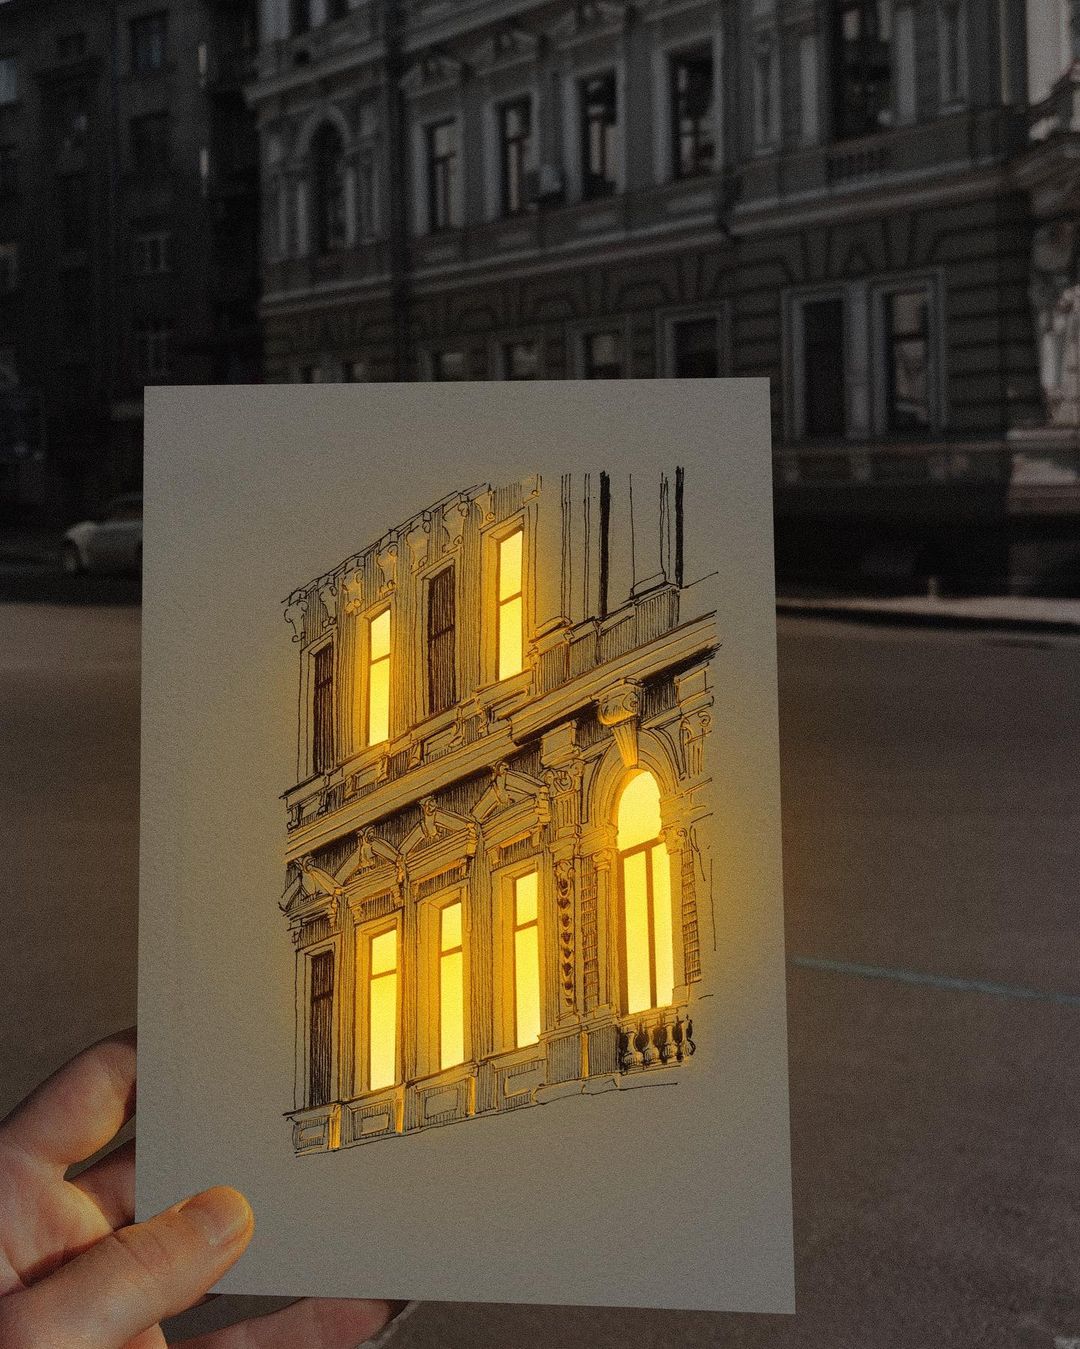 Glowing Archisketch Gorgeously Illuminated Architectural Sketches By Nikita Busyak 14